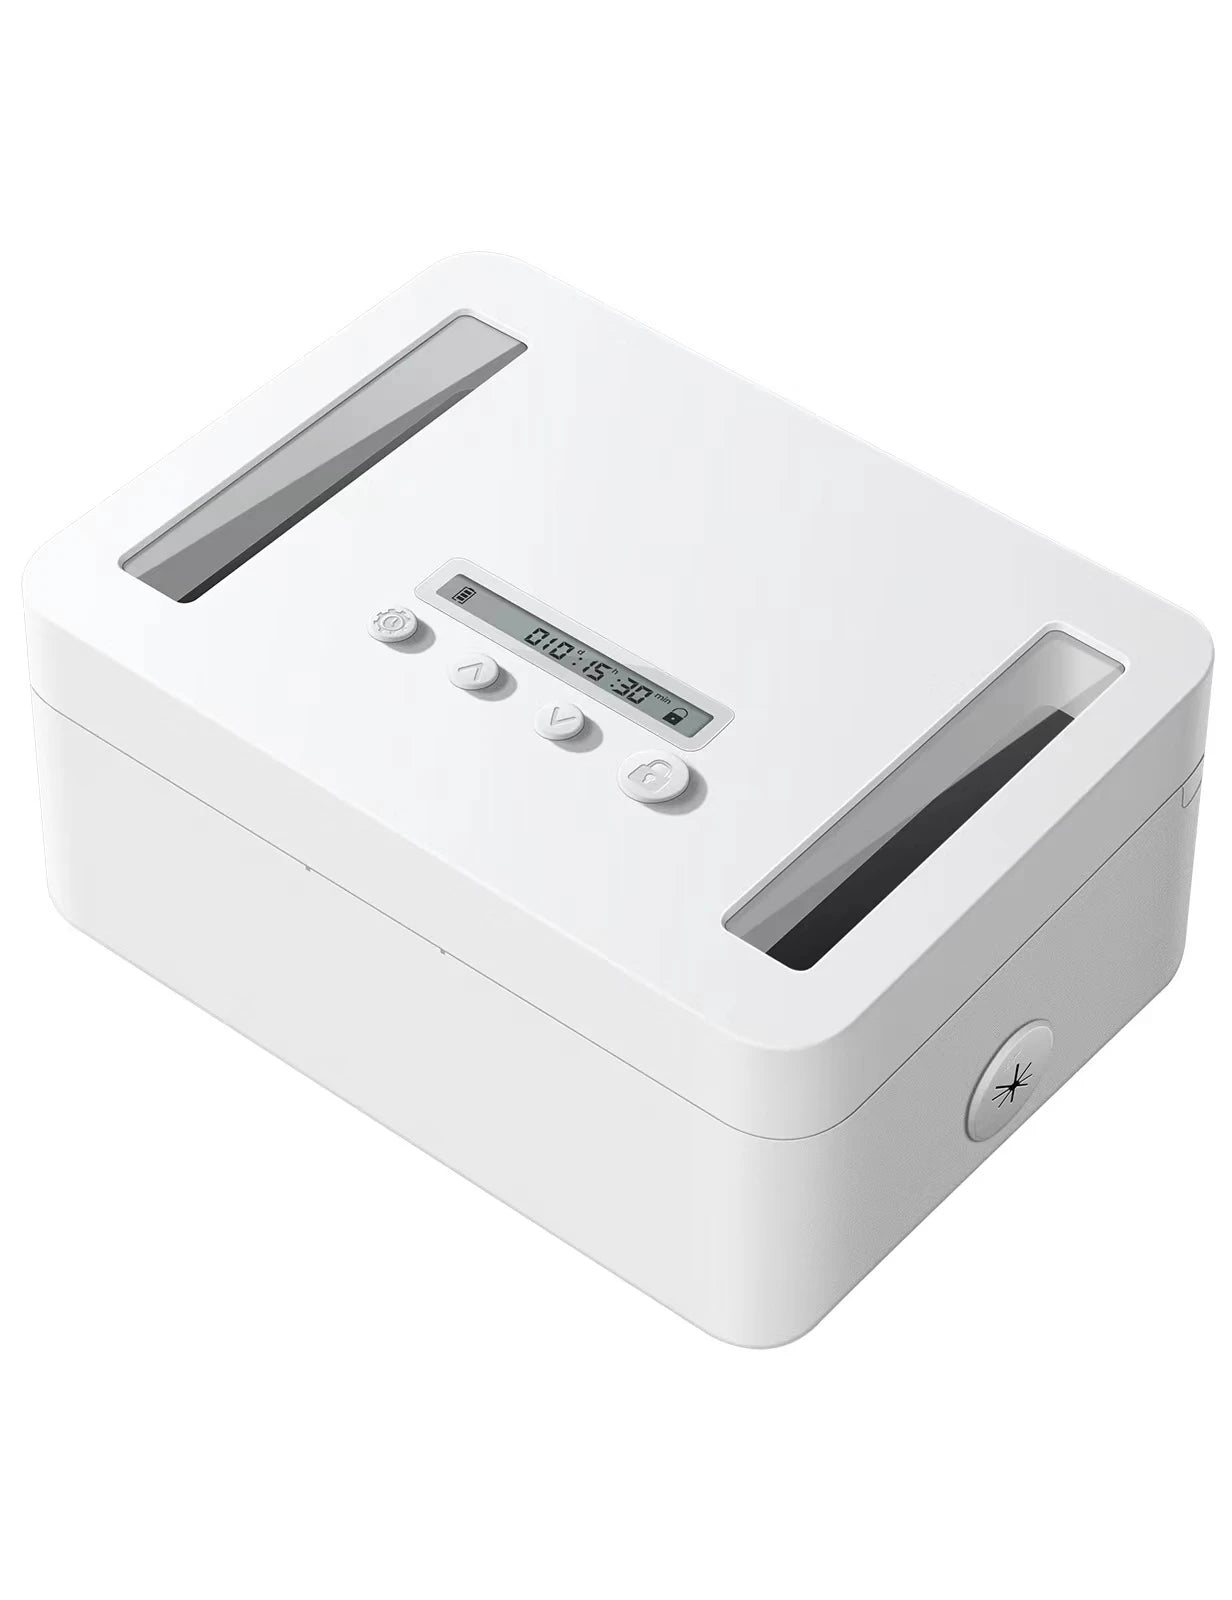 Front View of the Metal Timed Lock Box: A white, sturdy metal lock box with a top slot for inserting devices, featuring a simple keypad and a small LED screen for timer display.